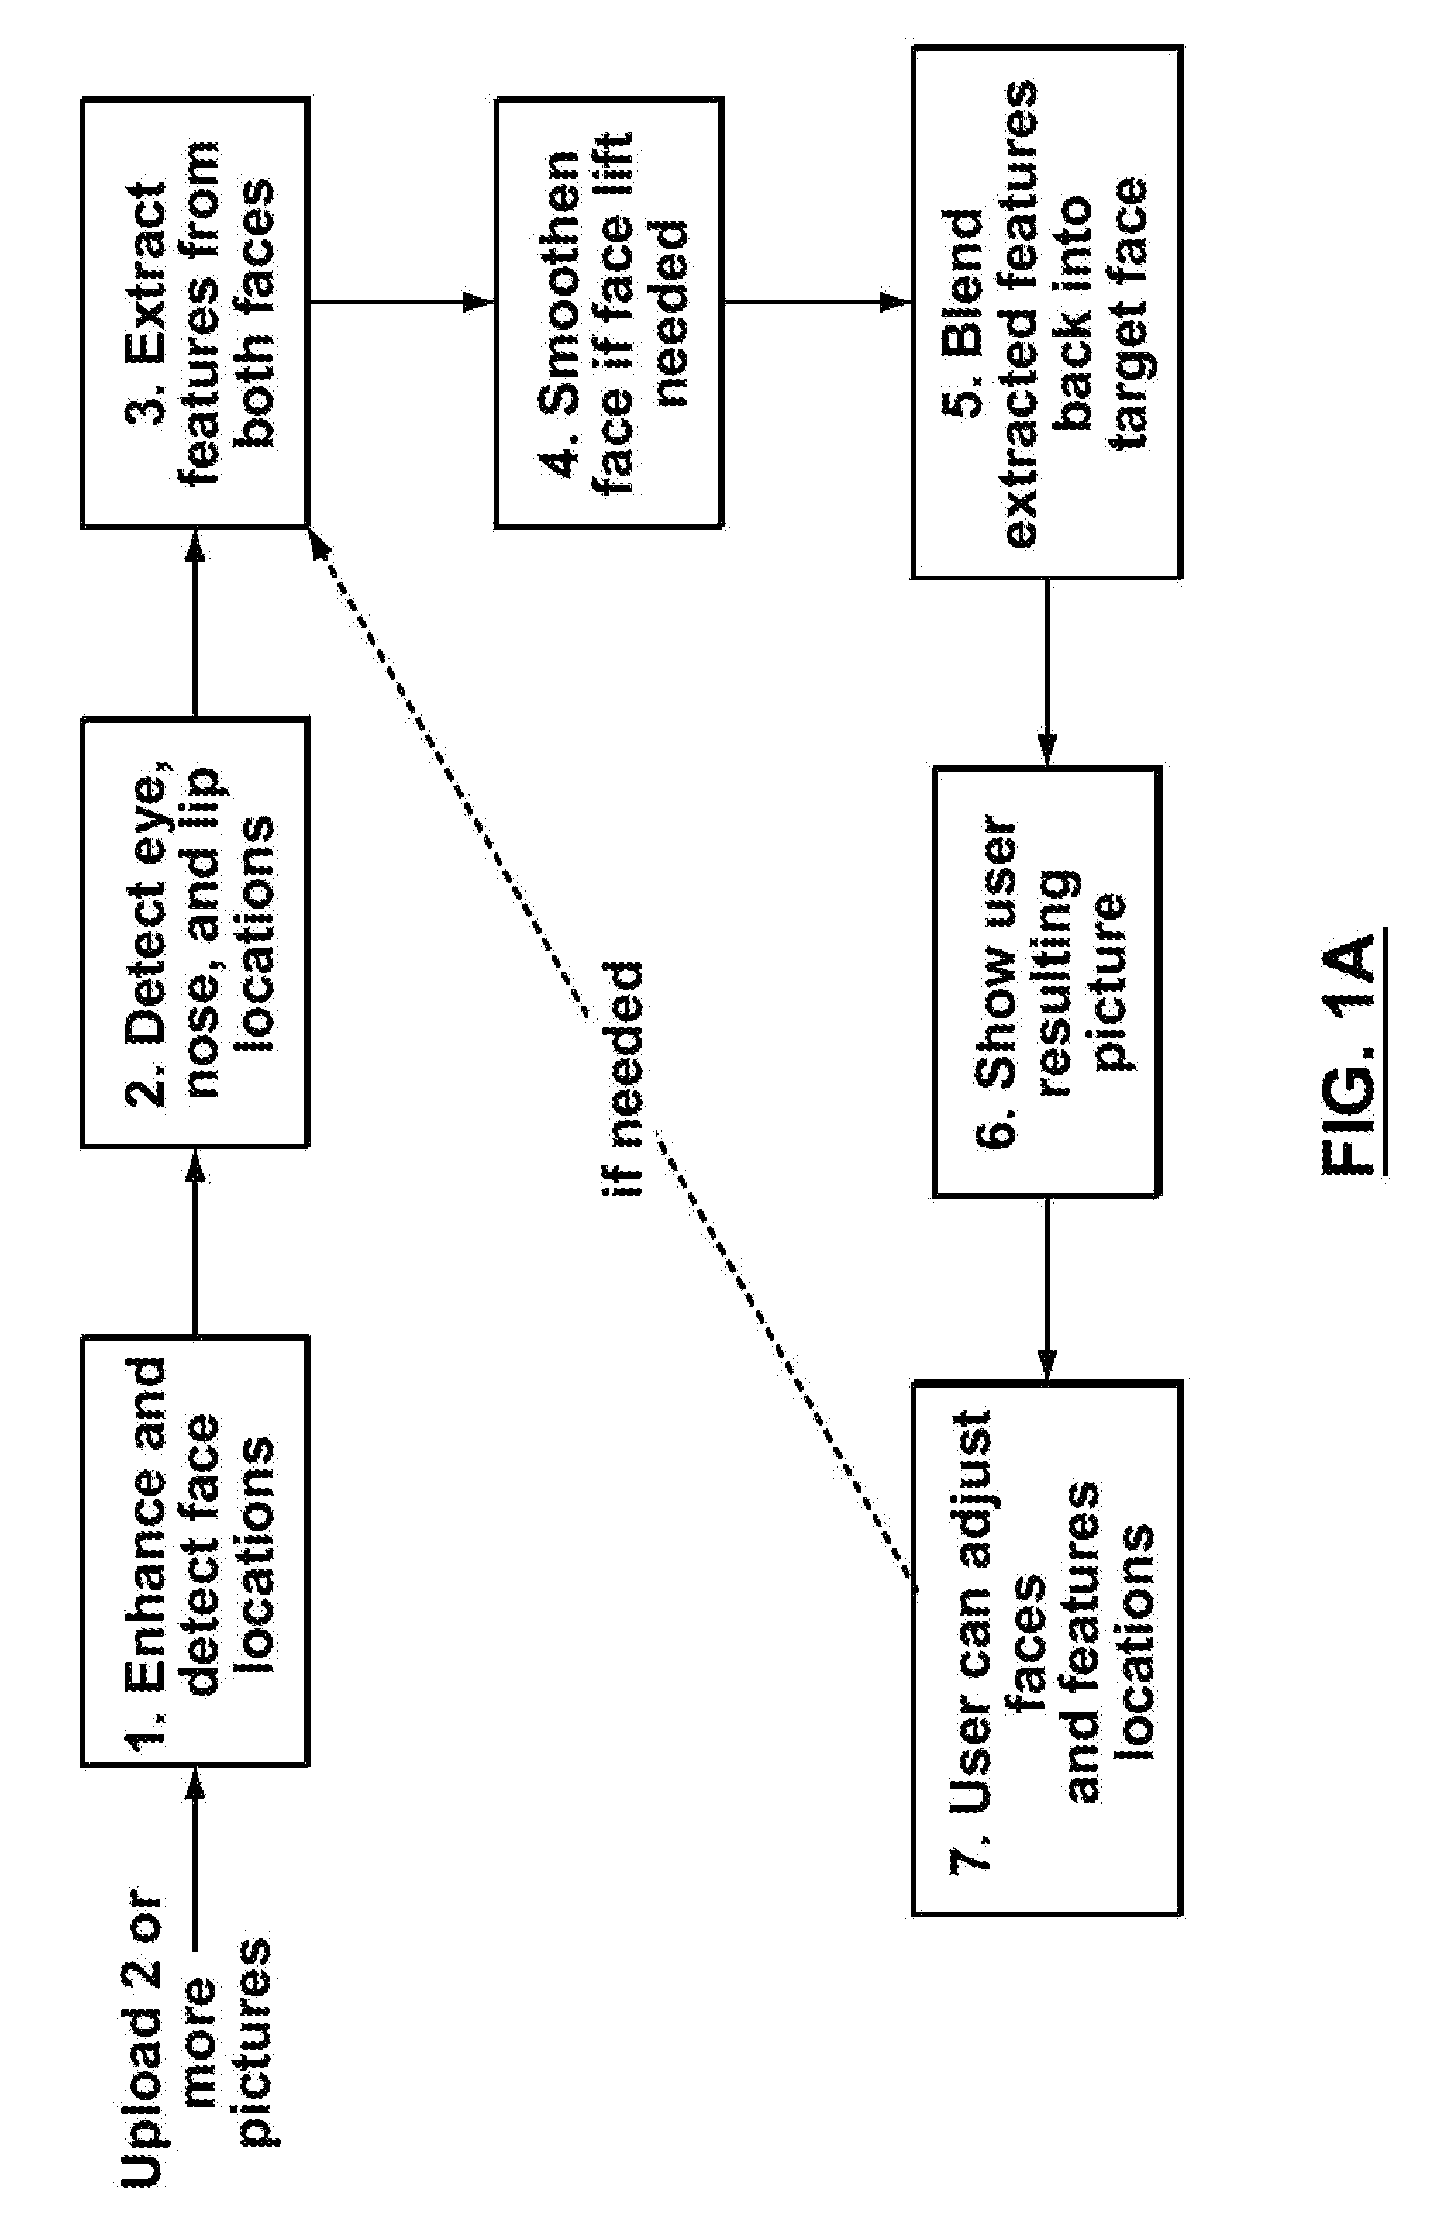 Method, system and computer program product for automatic and semi-automatic modification of digital images of faces